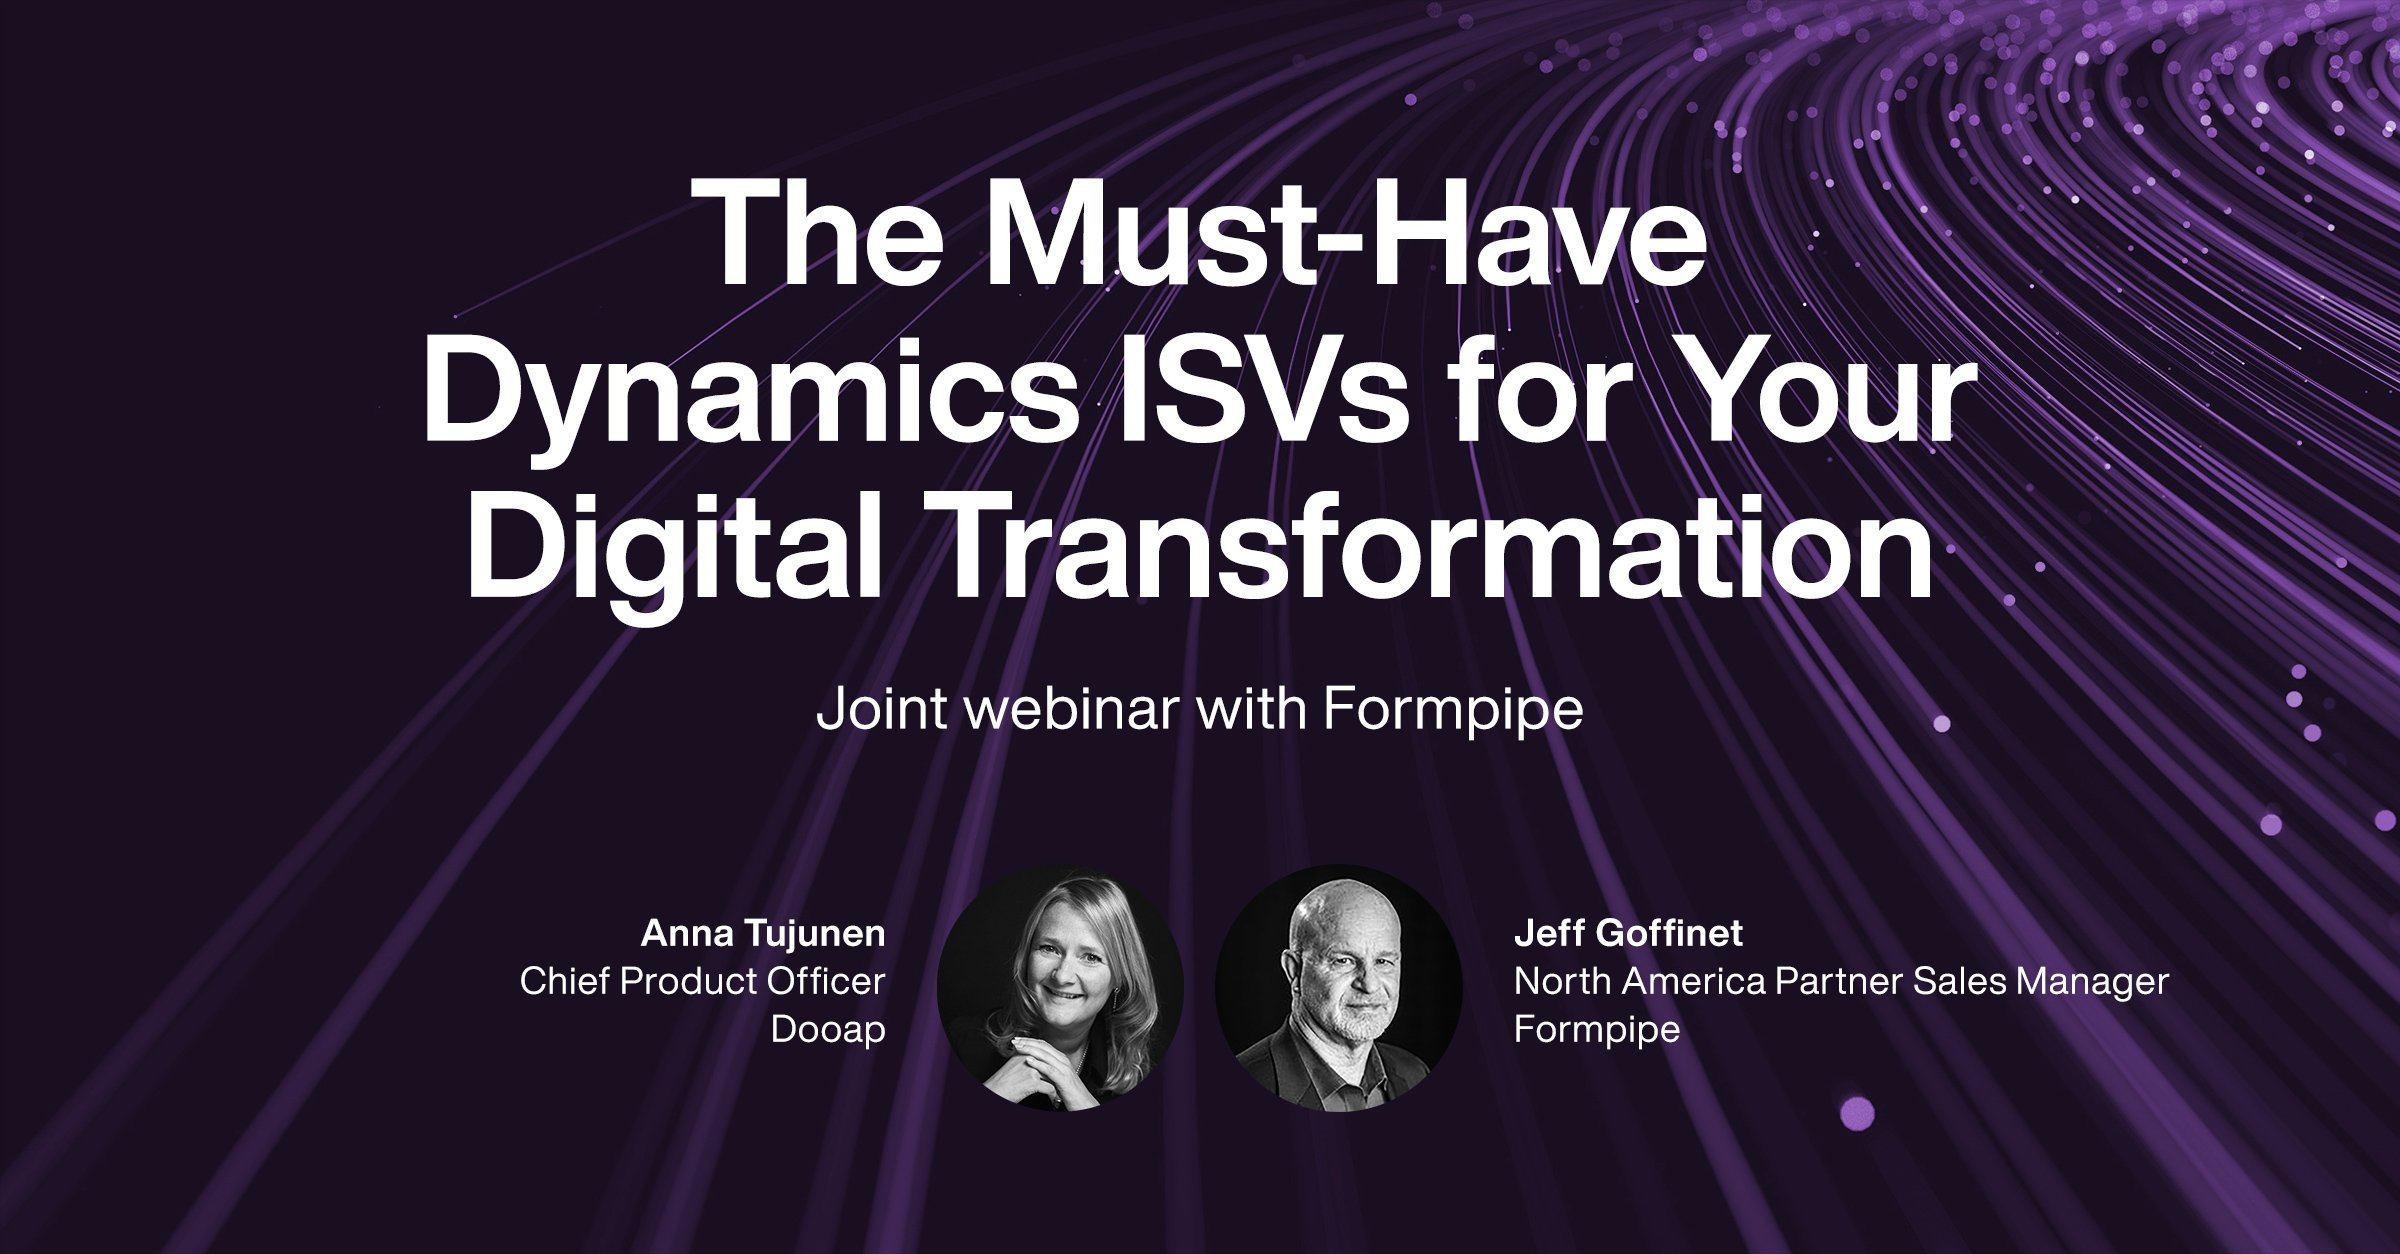 The Must-Have Dynamics ISVs for Your Digital Transformation